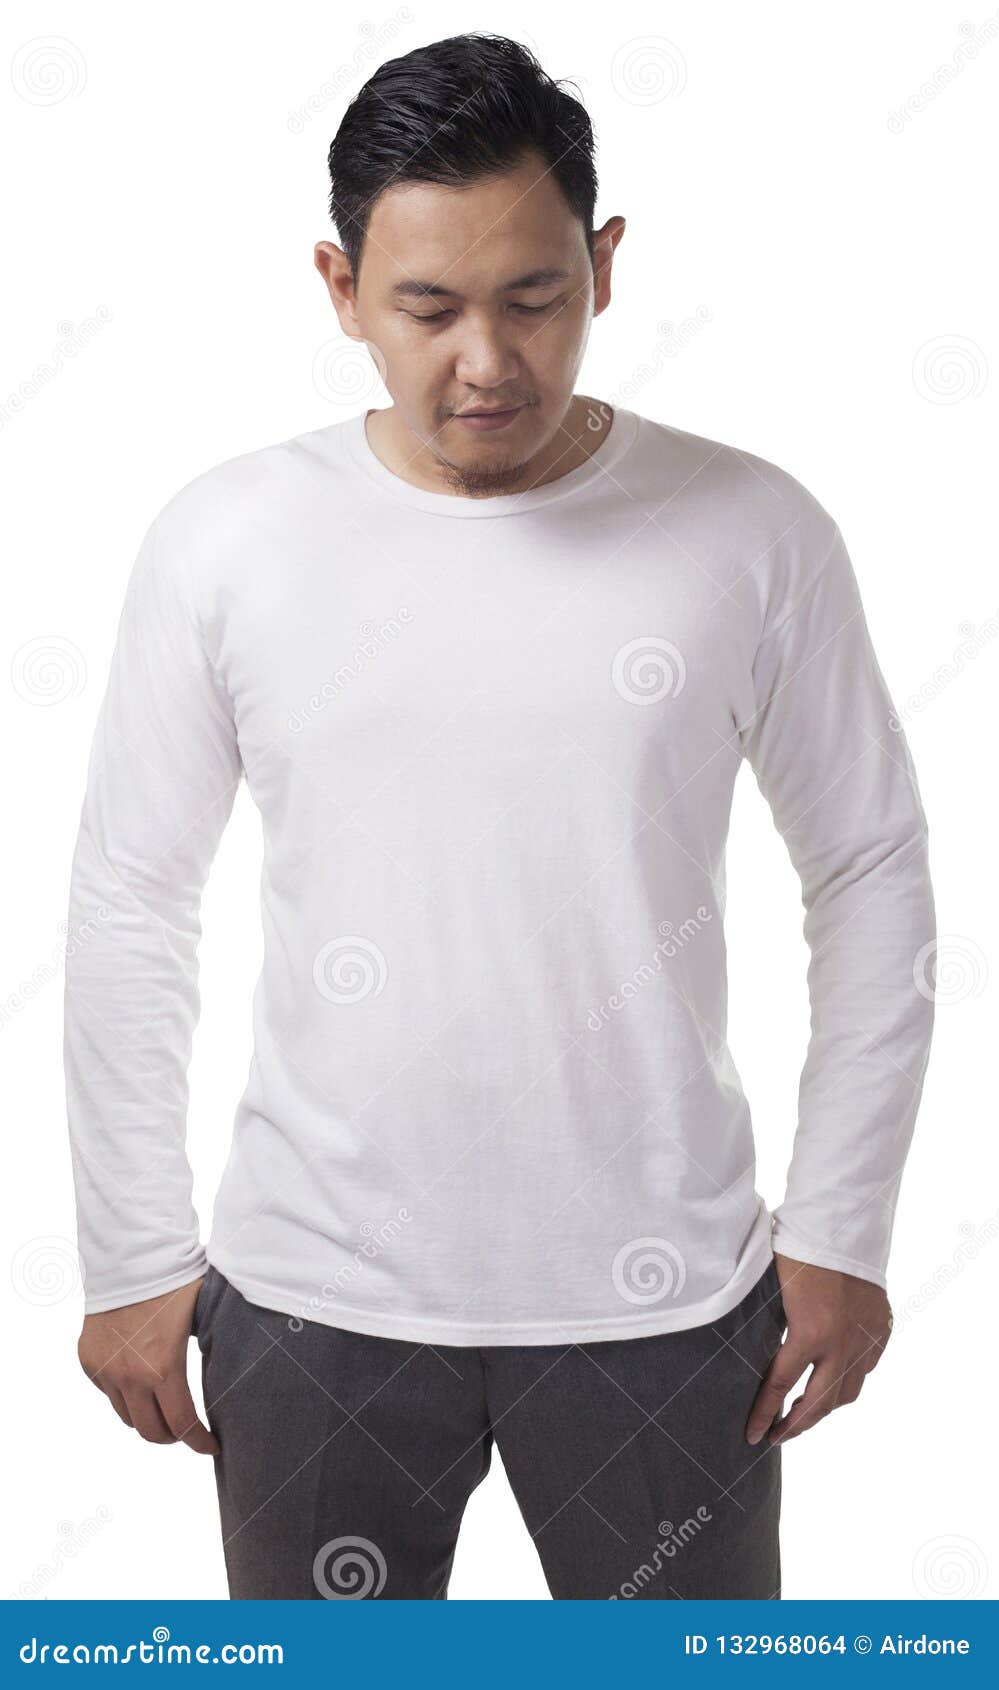 Download White Long Sleeved Shirt Design Template Stock Photo ...